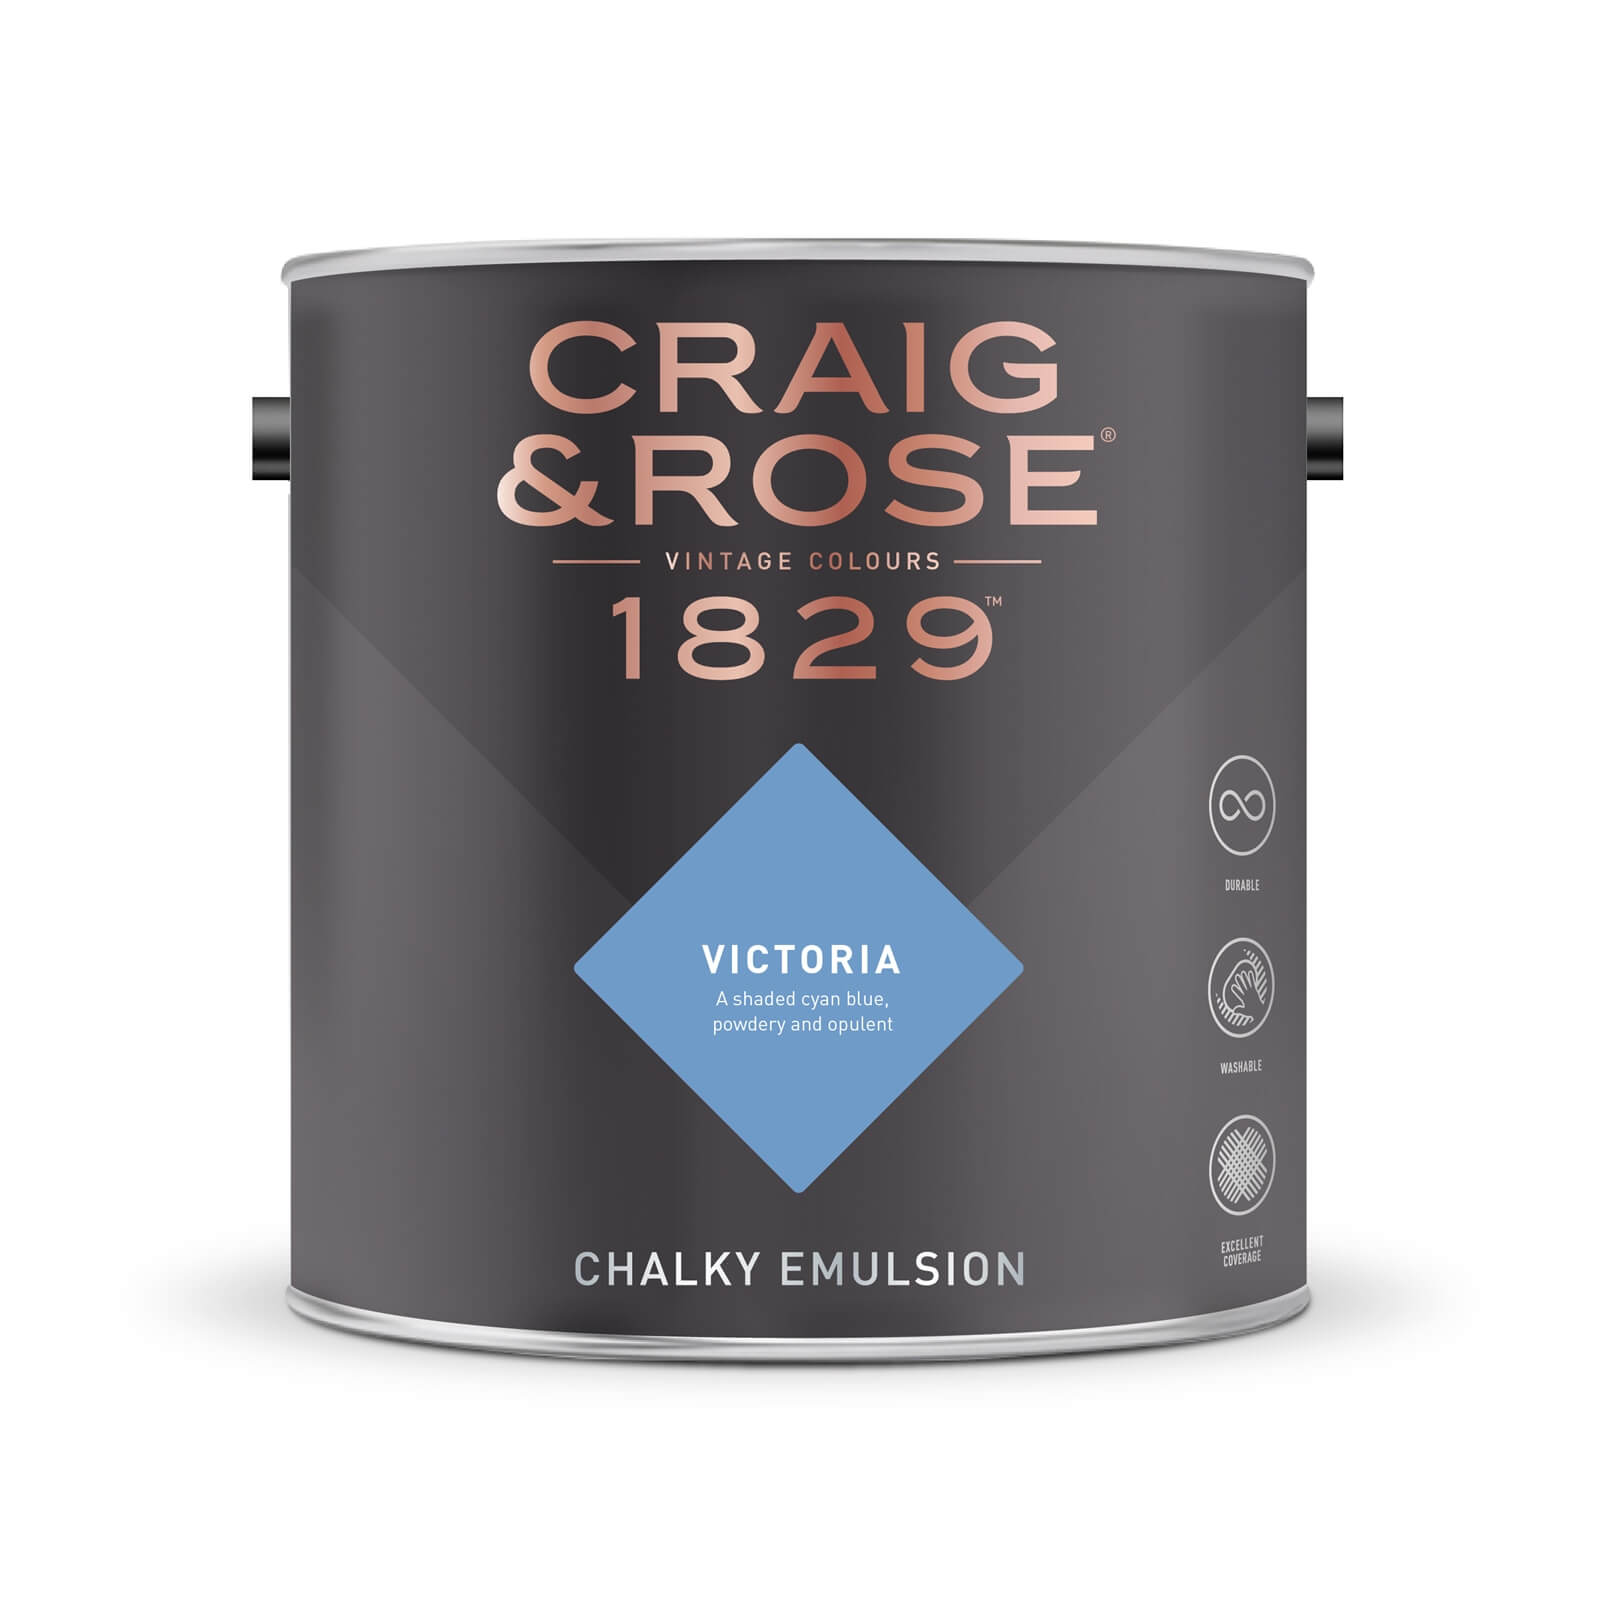 Craig & Rose 1829 Chalky Emulsion Paint Victoria - Tester 50ml